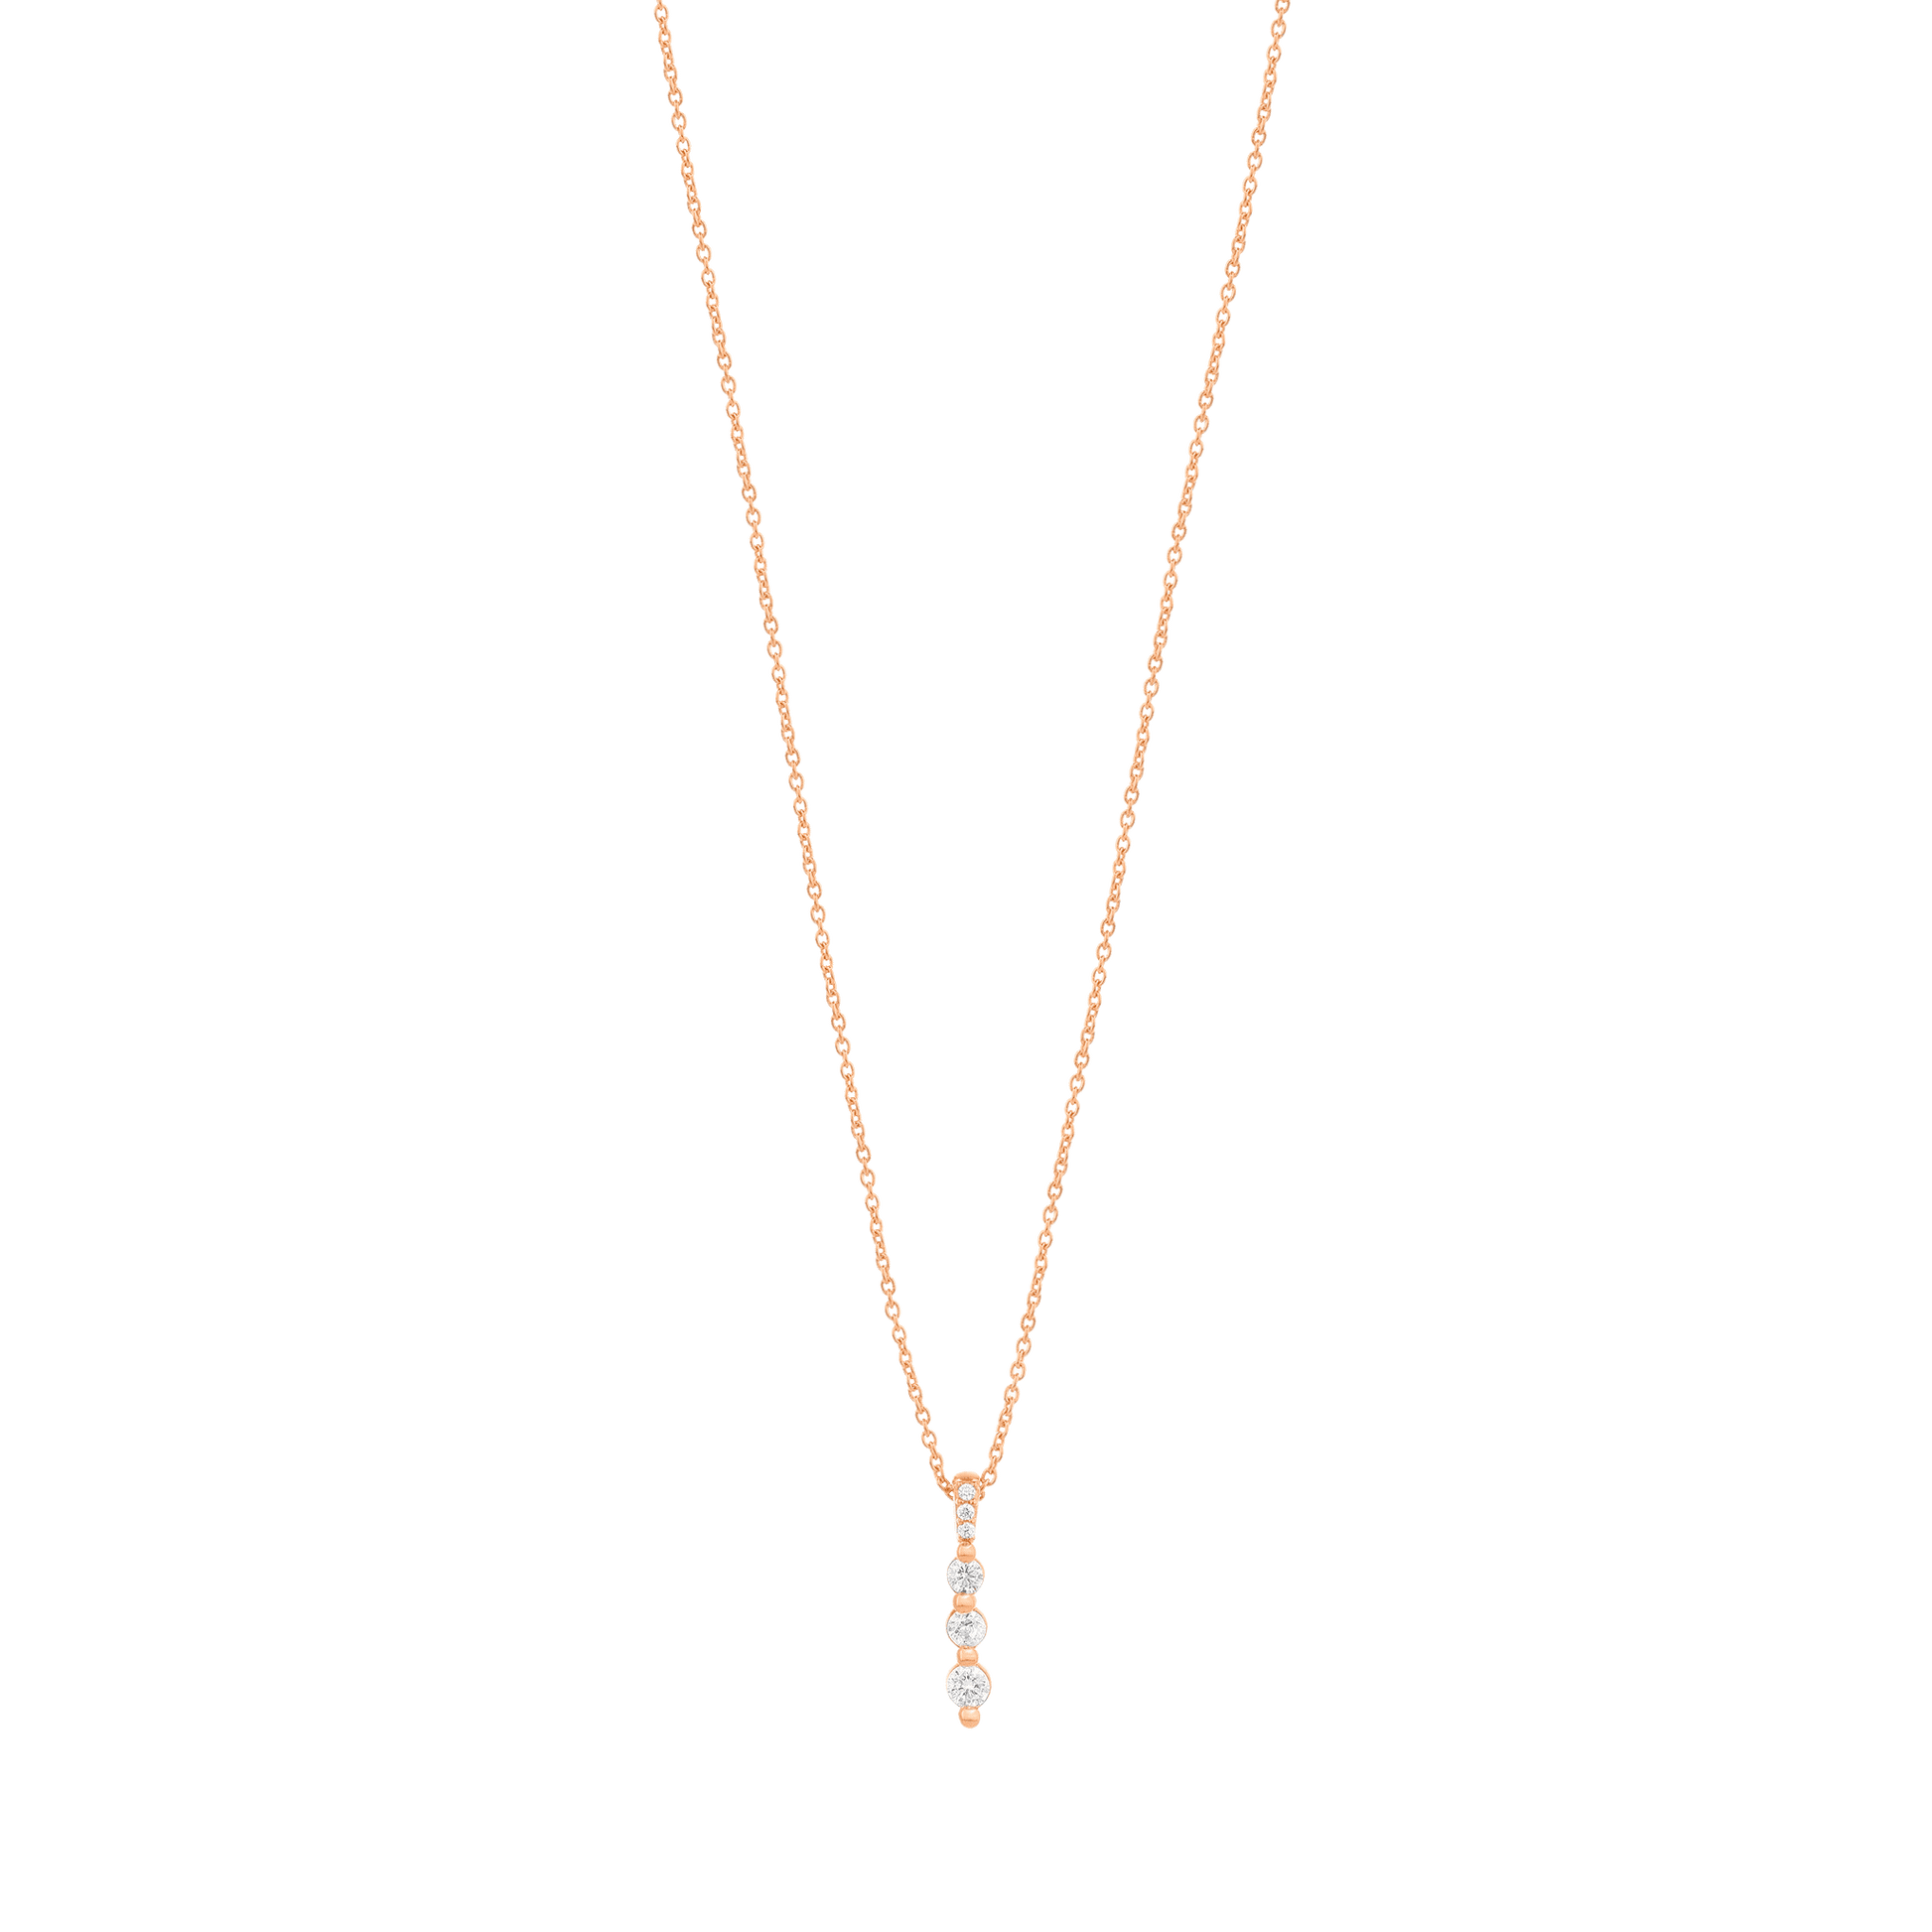 3 Diamonds Bar Necklace - 14K Yellow Gold Necklaces magal-dev 